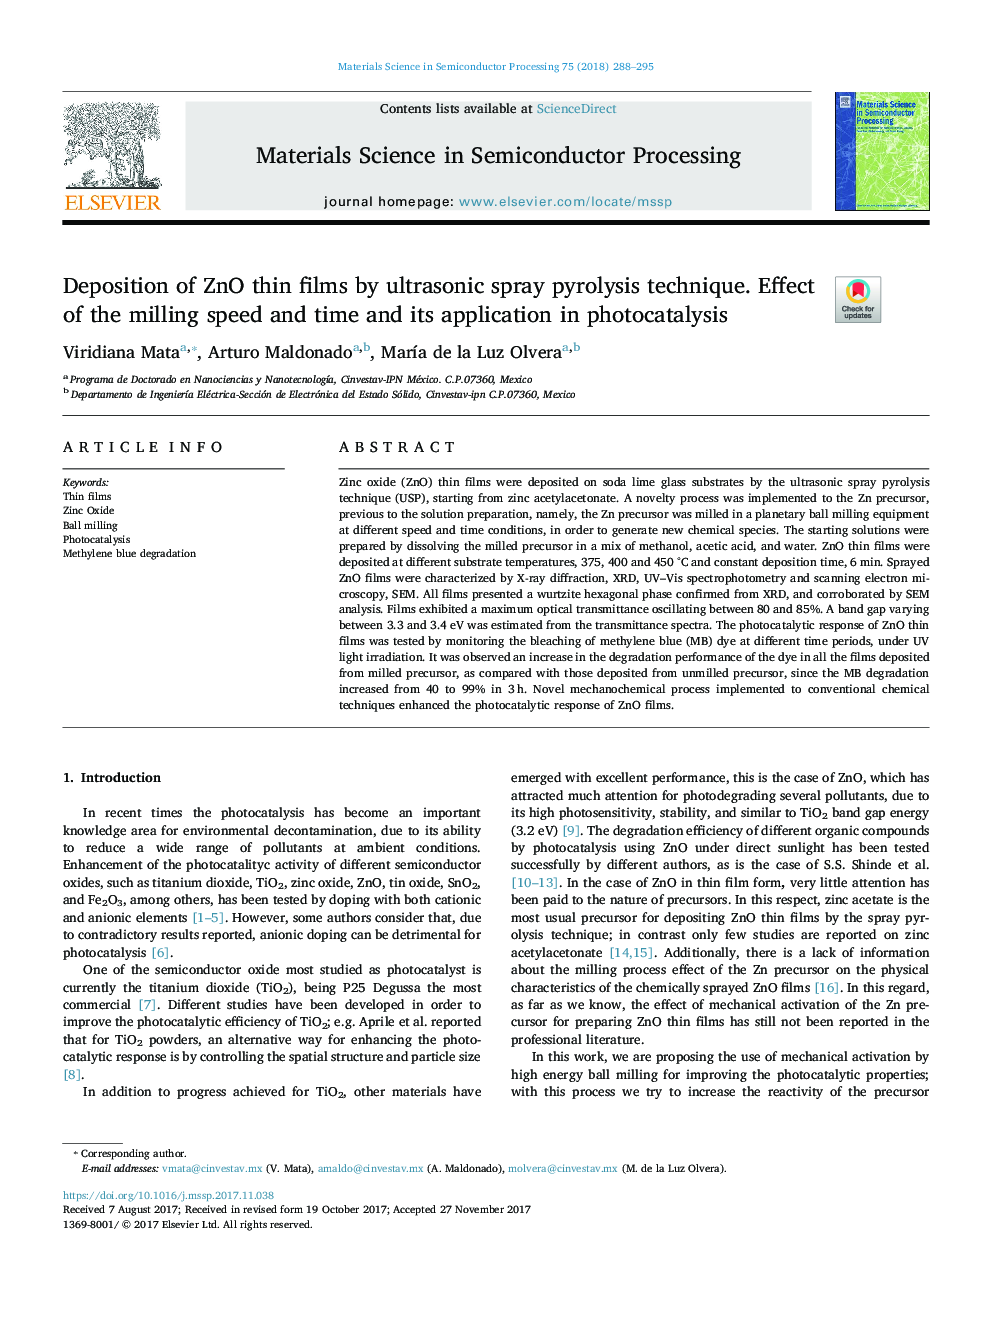 Deposition of ZnO thin films by ultrasonic spray pyrolysis technique. Effect of the milling speed and time and its application in photocatalysis